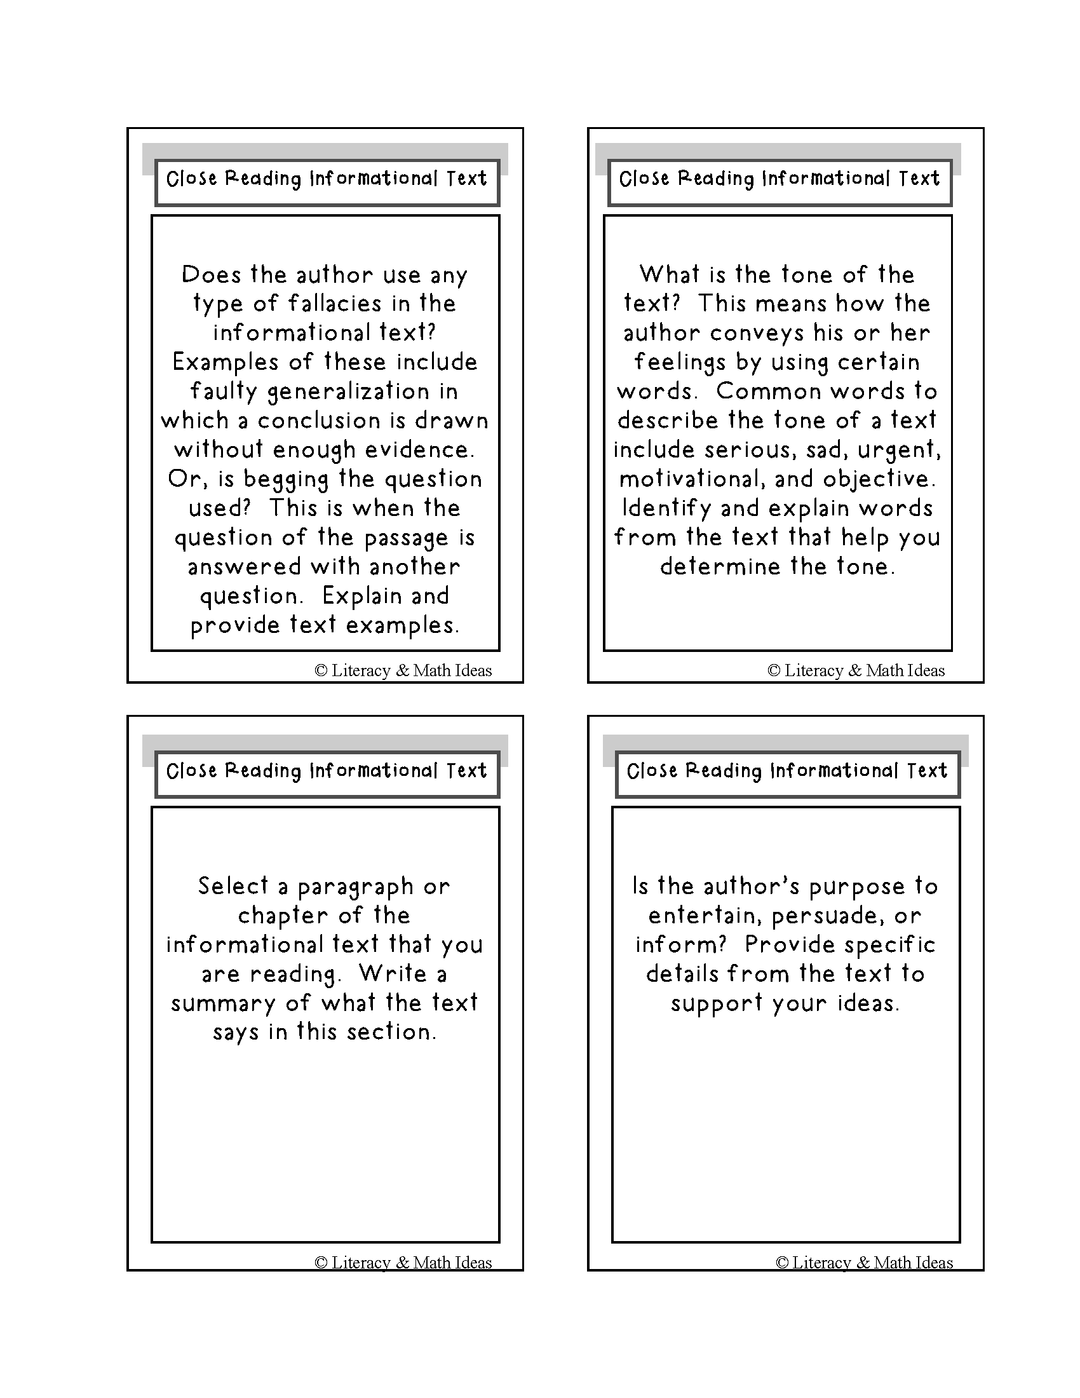 Common Core Close Reading Informational Text Task Cards